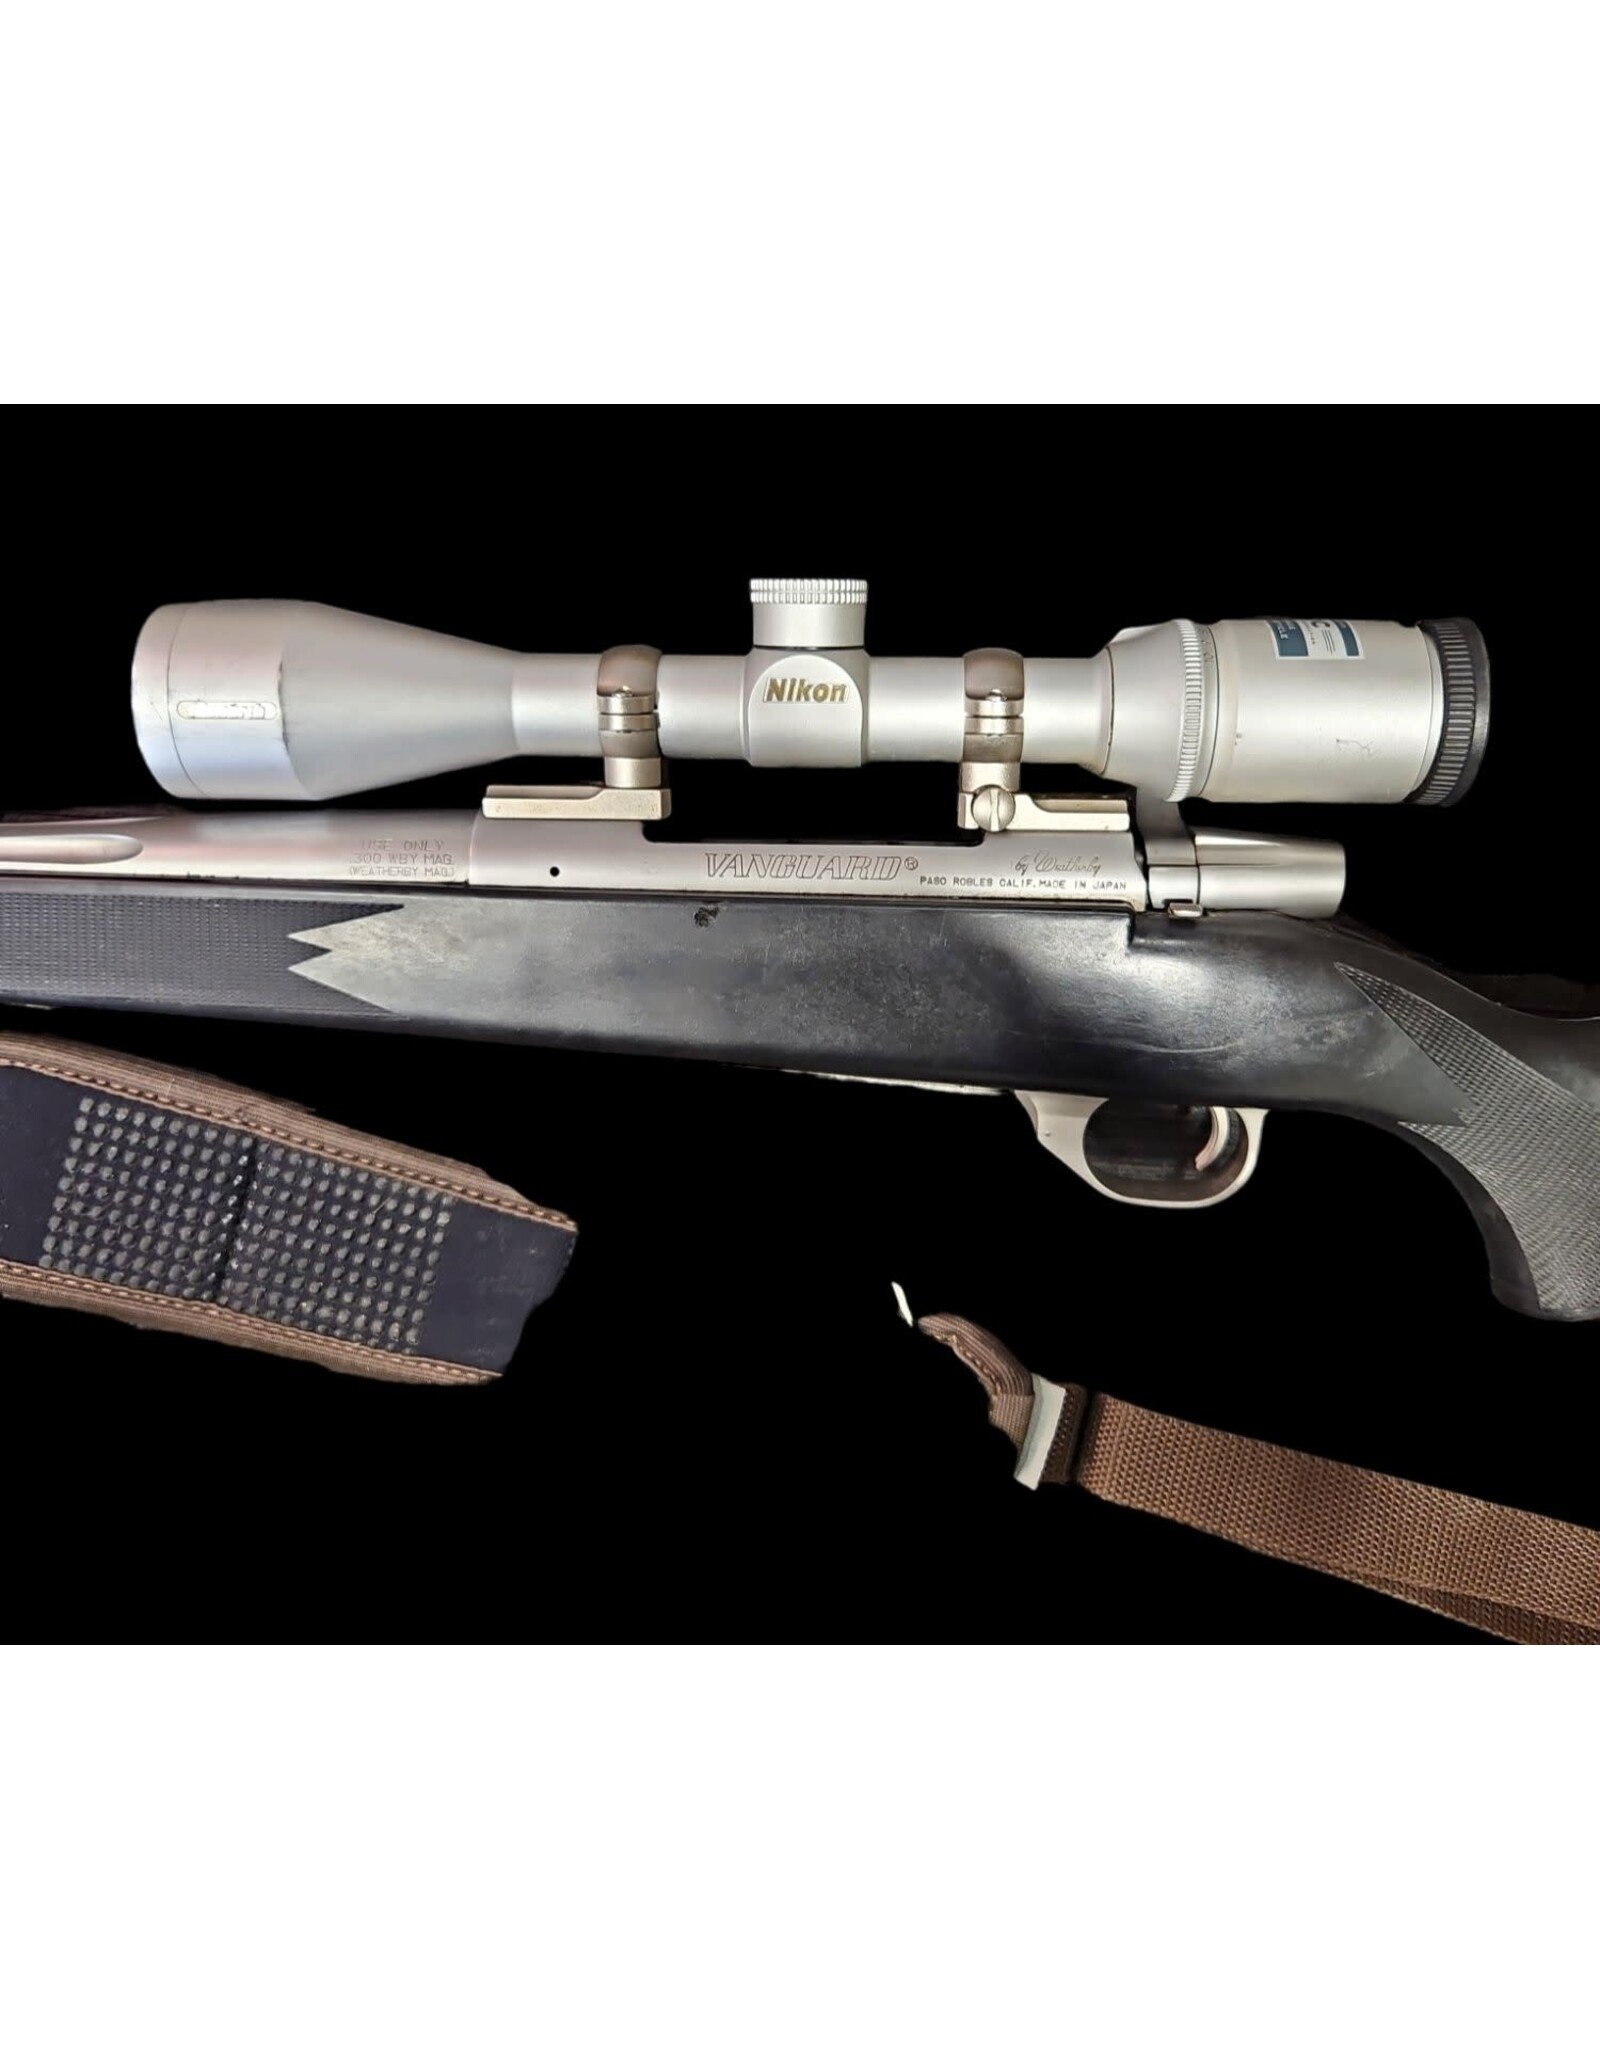 WEATHERBY USED WBY VAN 300WBY STAINLESS FLUTED BLACK SYN PKG W/ MUZZLE BREAK & NIKON MONARCH 4-10X40